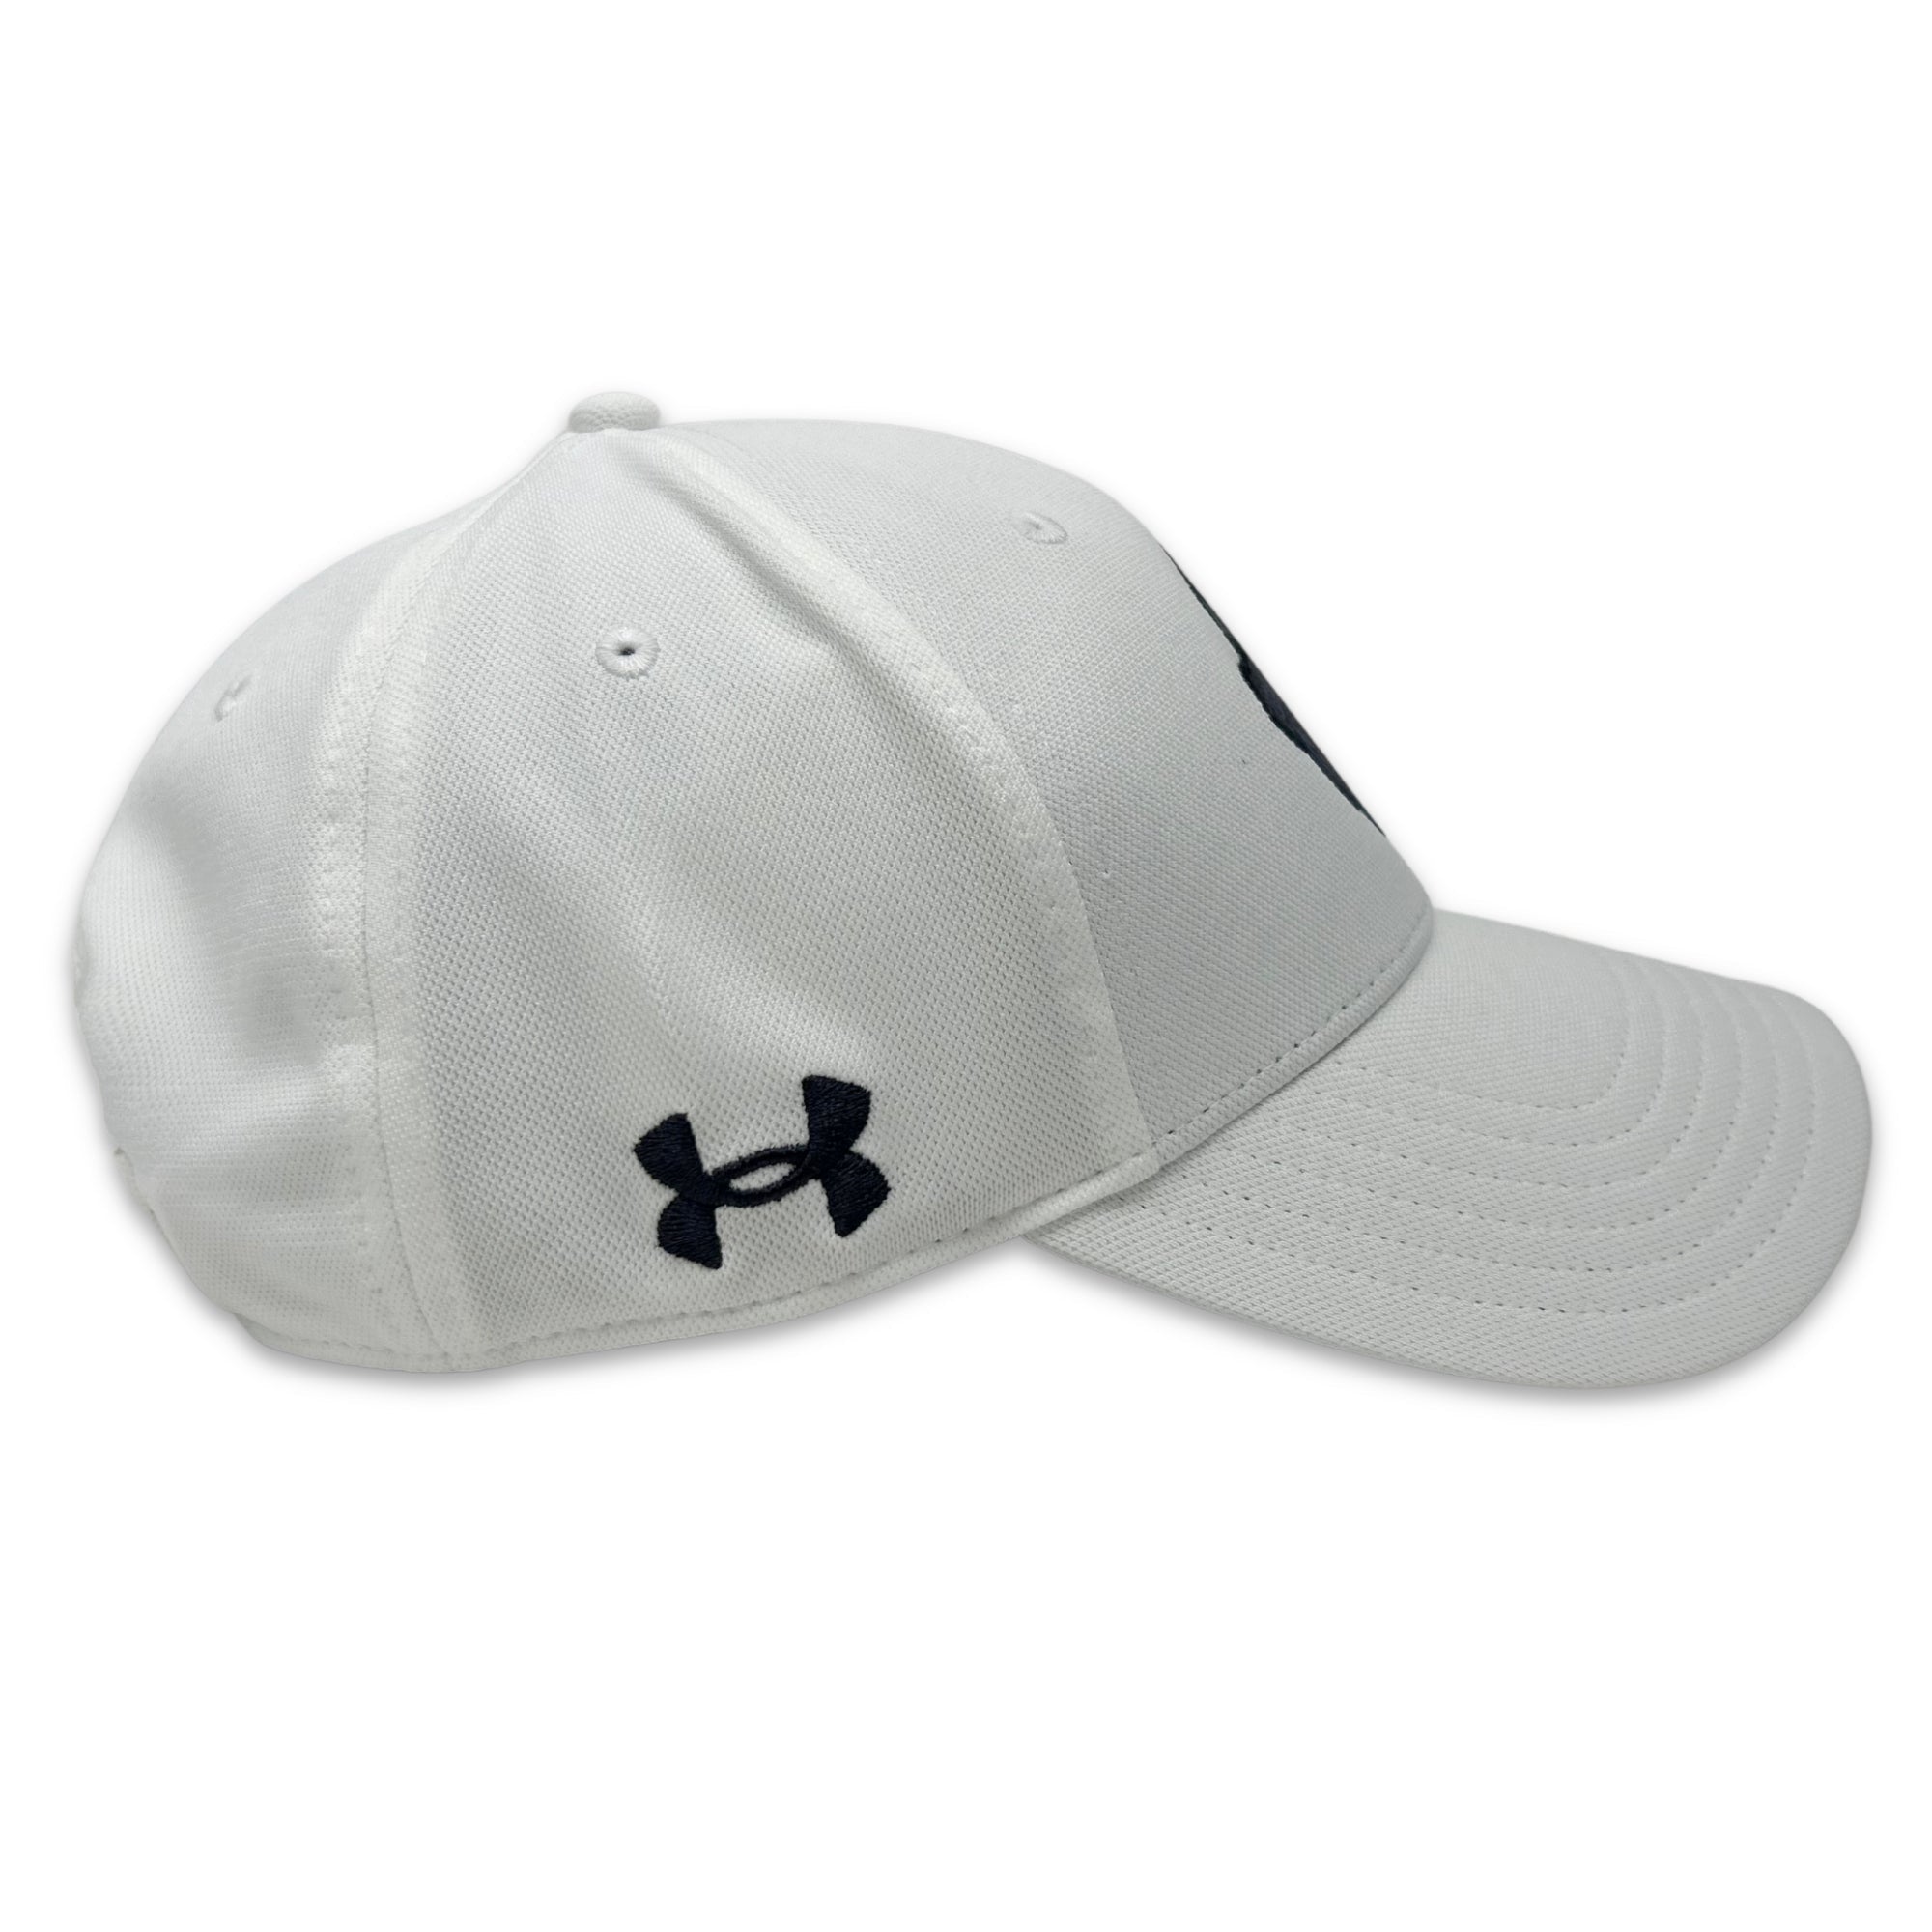 Navy Under Armour 2023 Hat Adjustable Blitzing Rivalry (White)